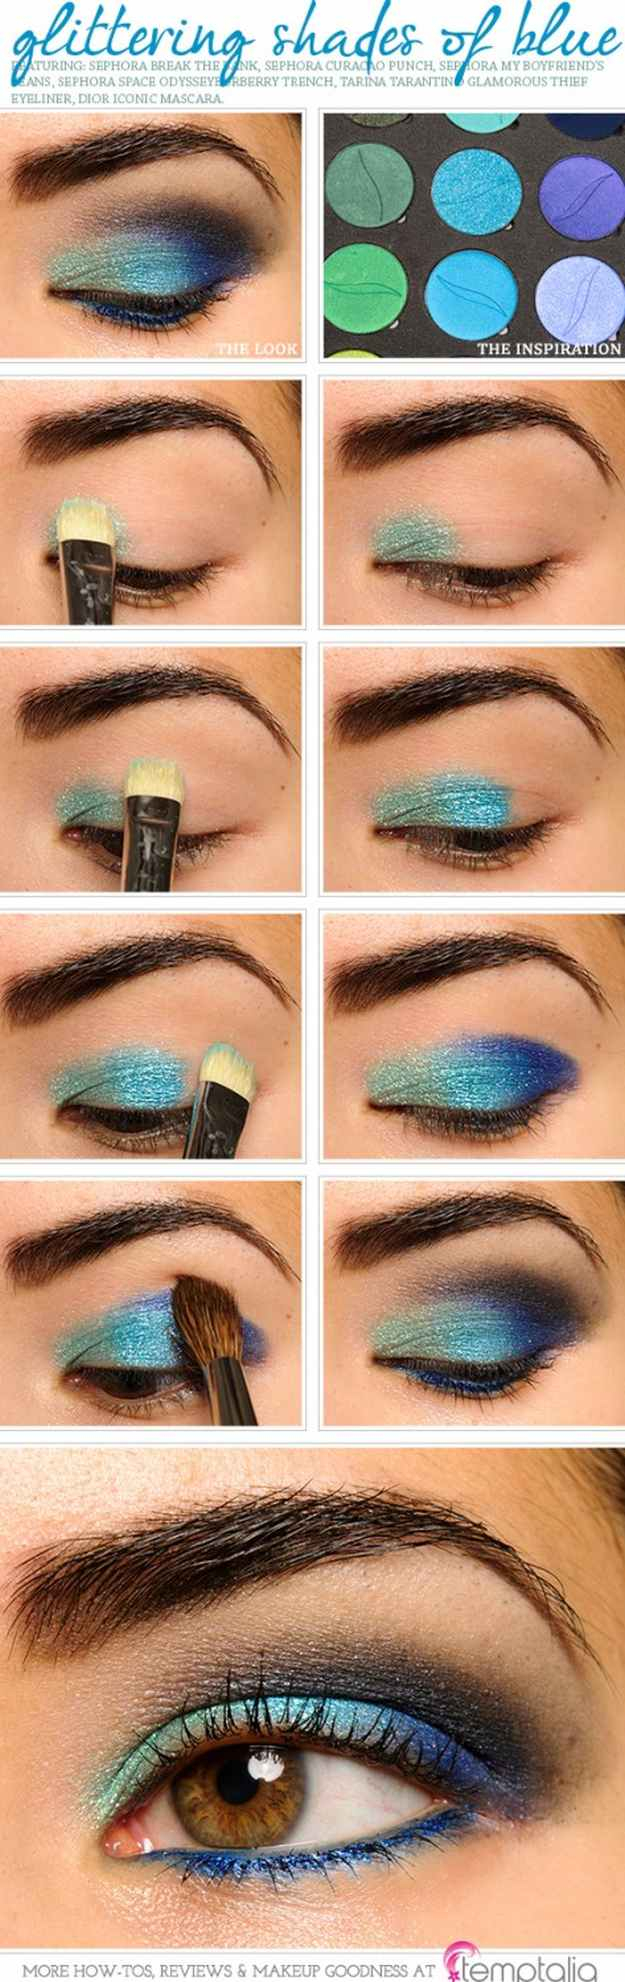 Makeup Looks For Brown Eyes Gorgeous Easy Makeup Tutorials For Brown Eyes Makeup Tutorials